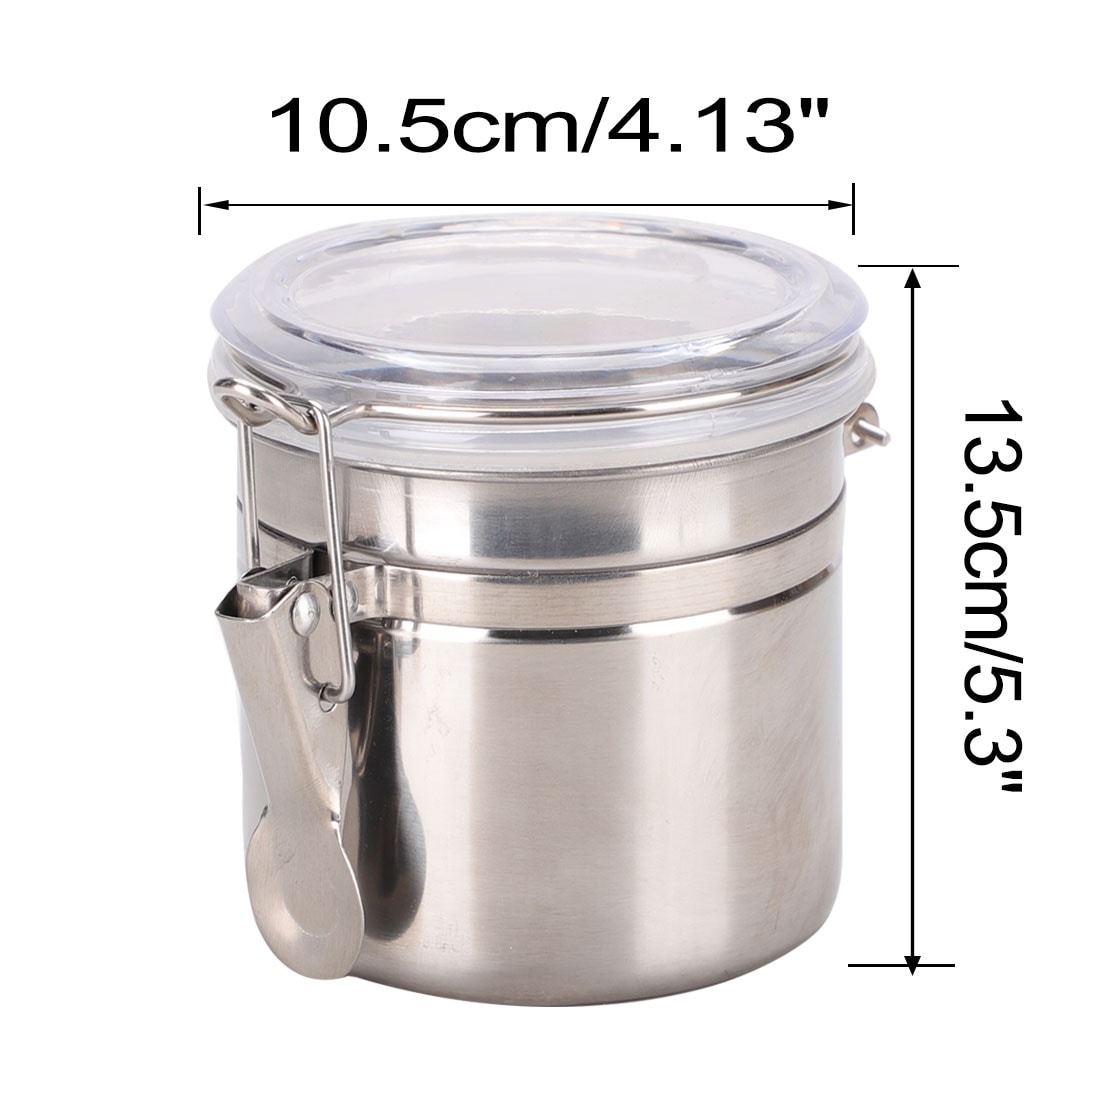 https://ak1.ostkcdn.com/images/products/is/images/direct/1169663fa8483ff196f917b3a66238dcb8754930/Stainless-Steel-Airtight-Canister-Food-Container.jpg